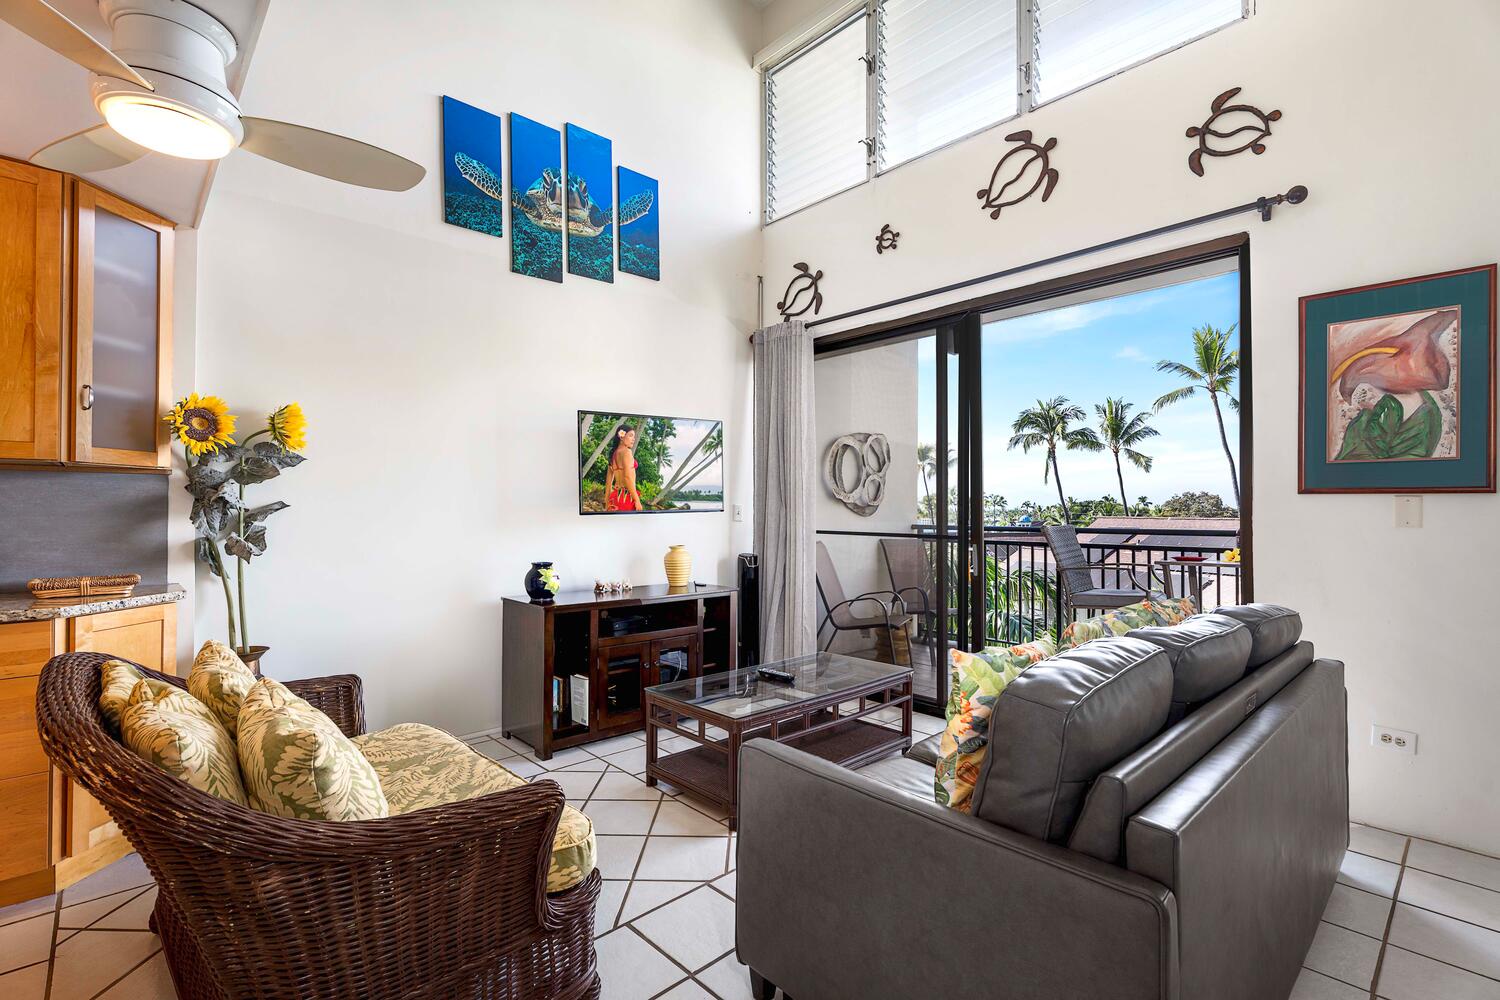 Kailua Kona Vacation Rentals, Kona Alii 512 - Chic decor and tropical vibes in a living space that opens to ocean breezes on the lanai.